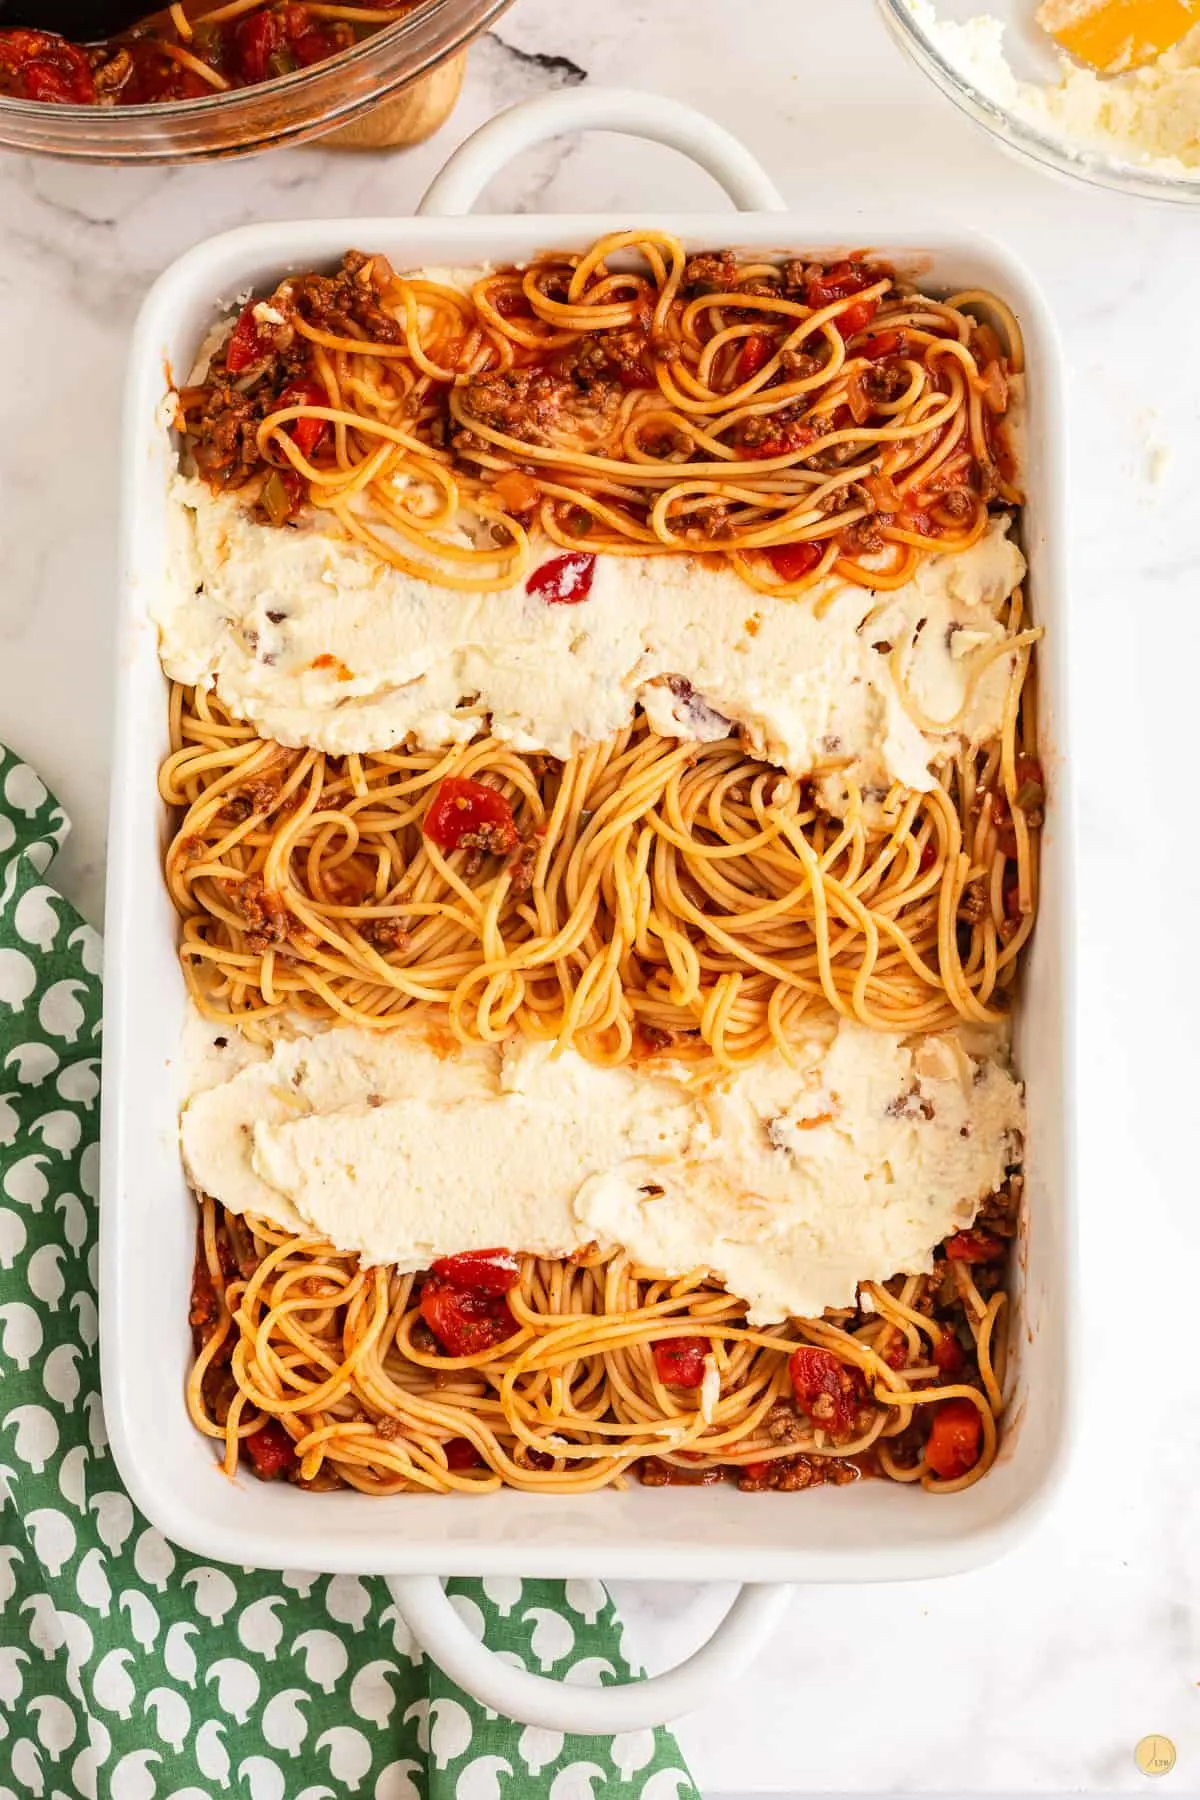 cheese on top of the spaghetti with lots of layers